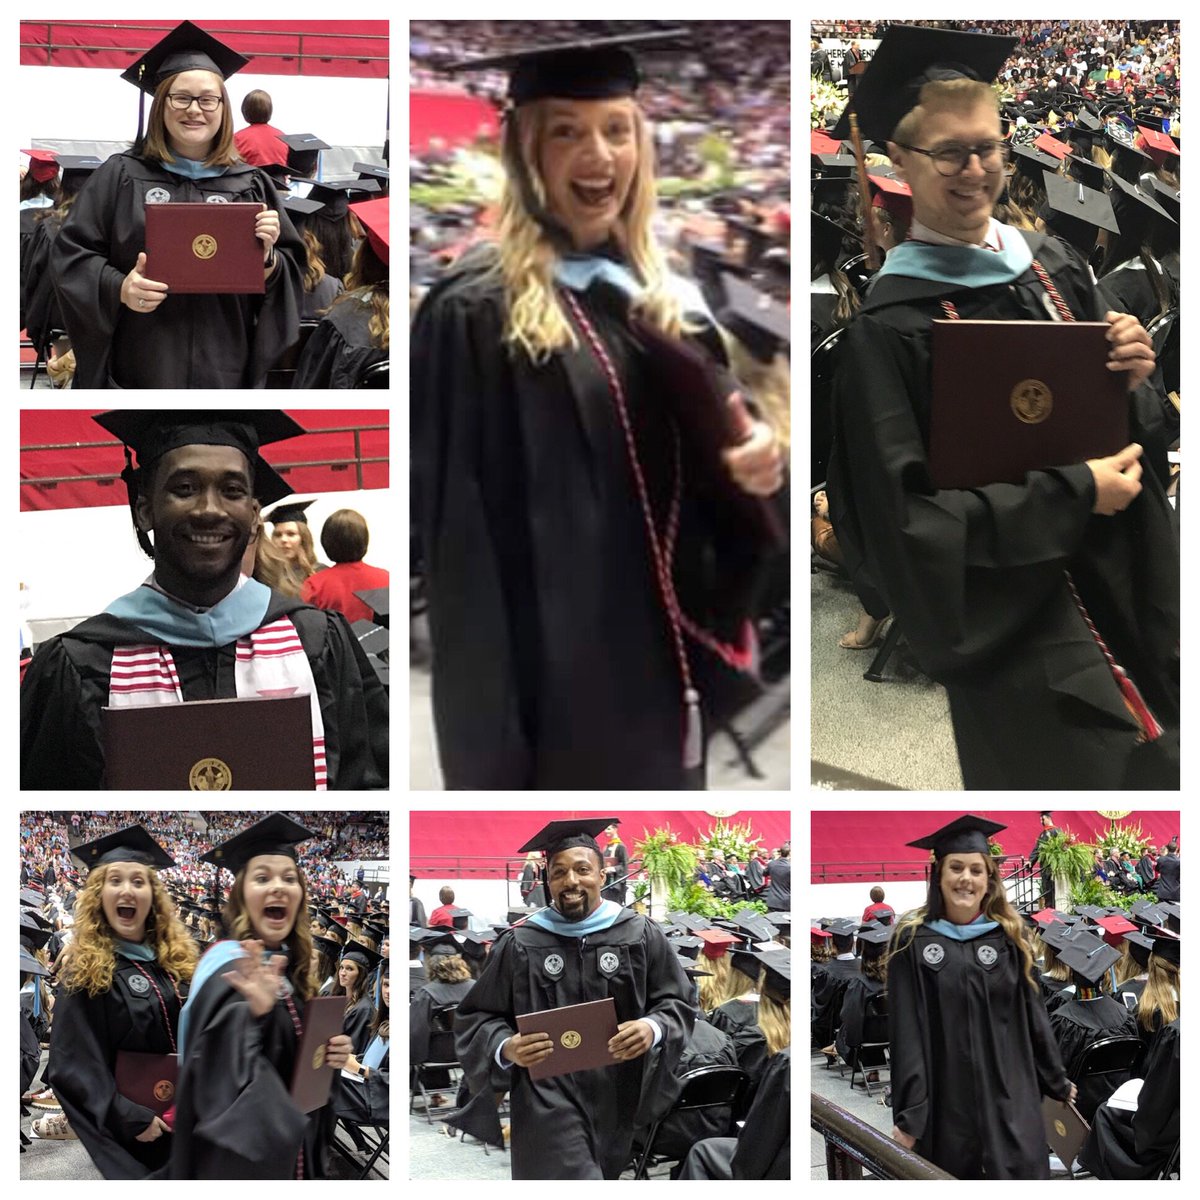 Congratulations to our @UA_Educator Higher Education Administration Masters graduates! YOU DID IT! “Oh The Places You’ll Go....” #JoyRising #RollTideRoll cc: @BamaHigherEd @UAHESA